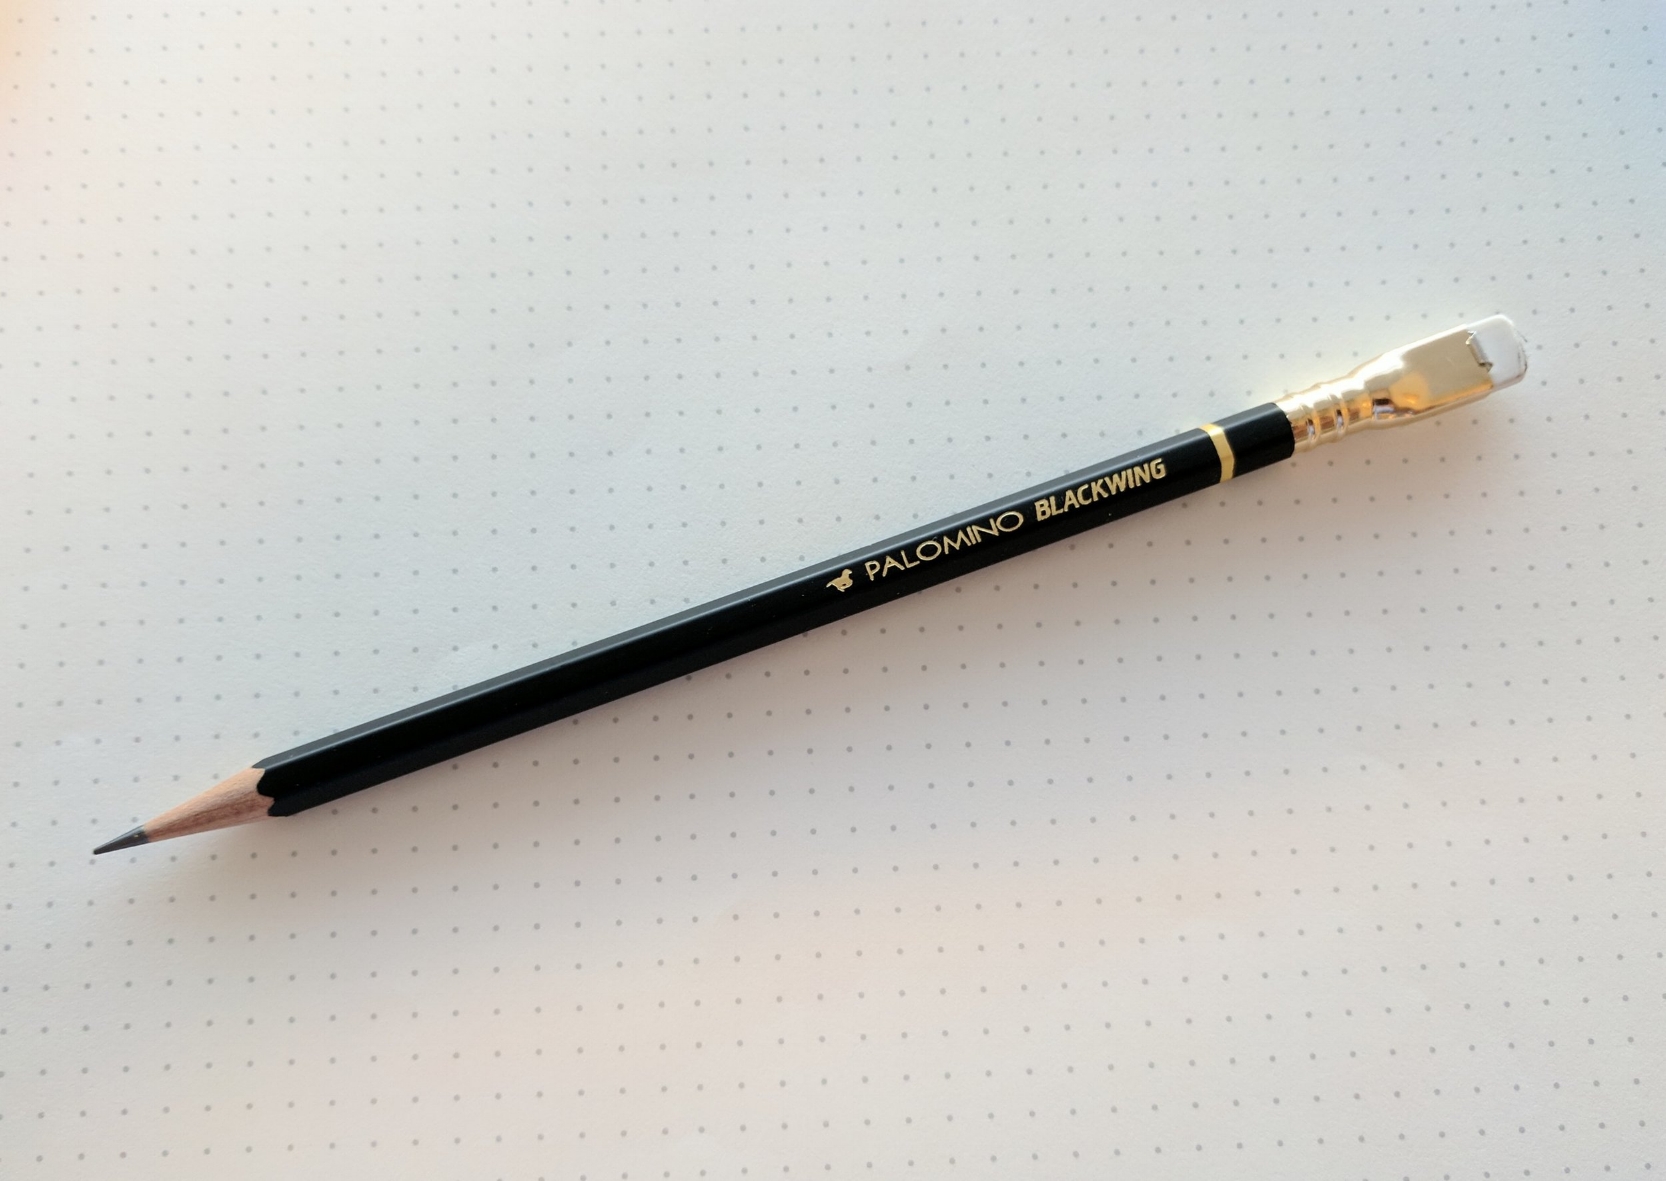 One Blackwing Pencil - Balanced & Firm